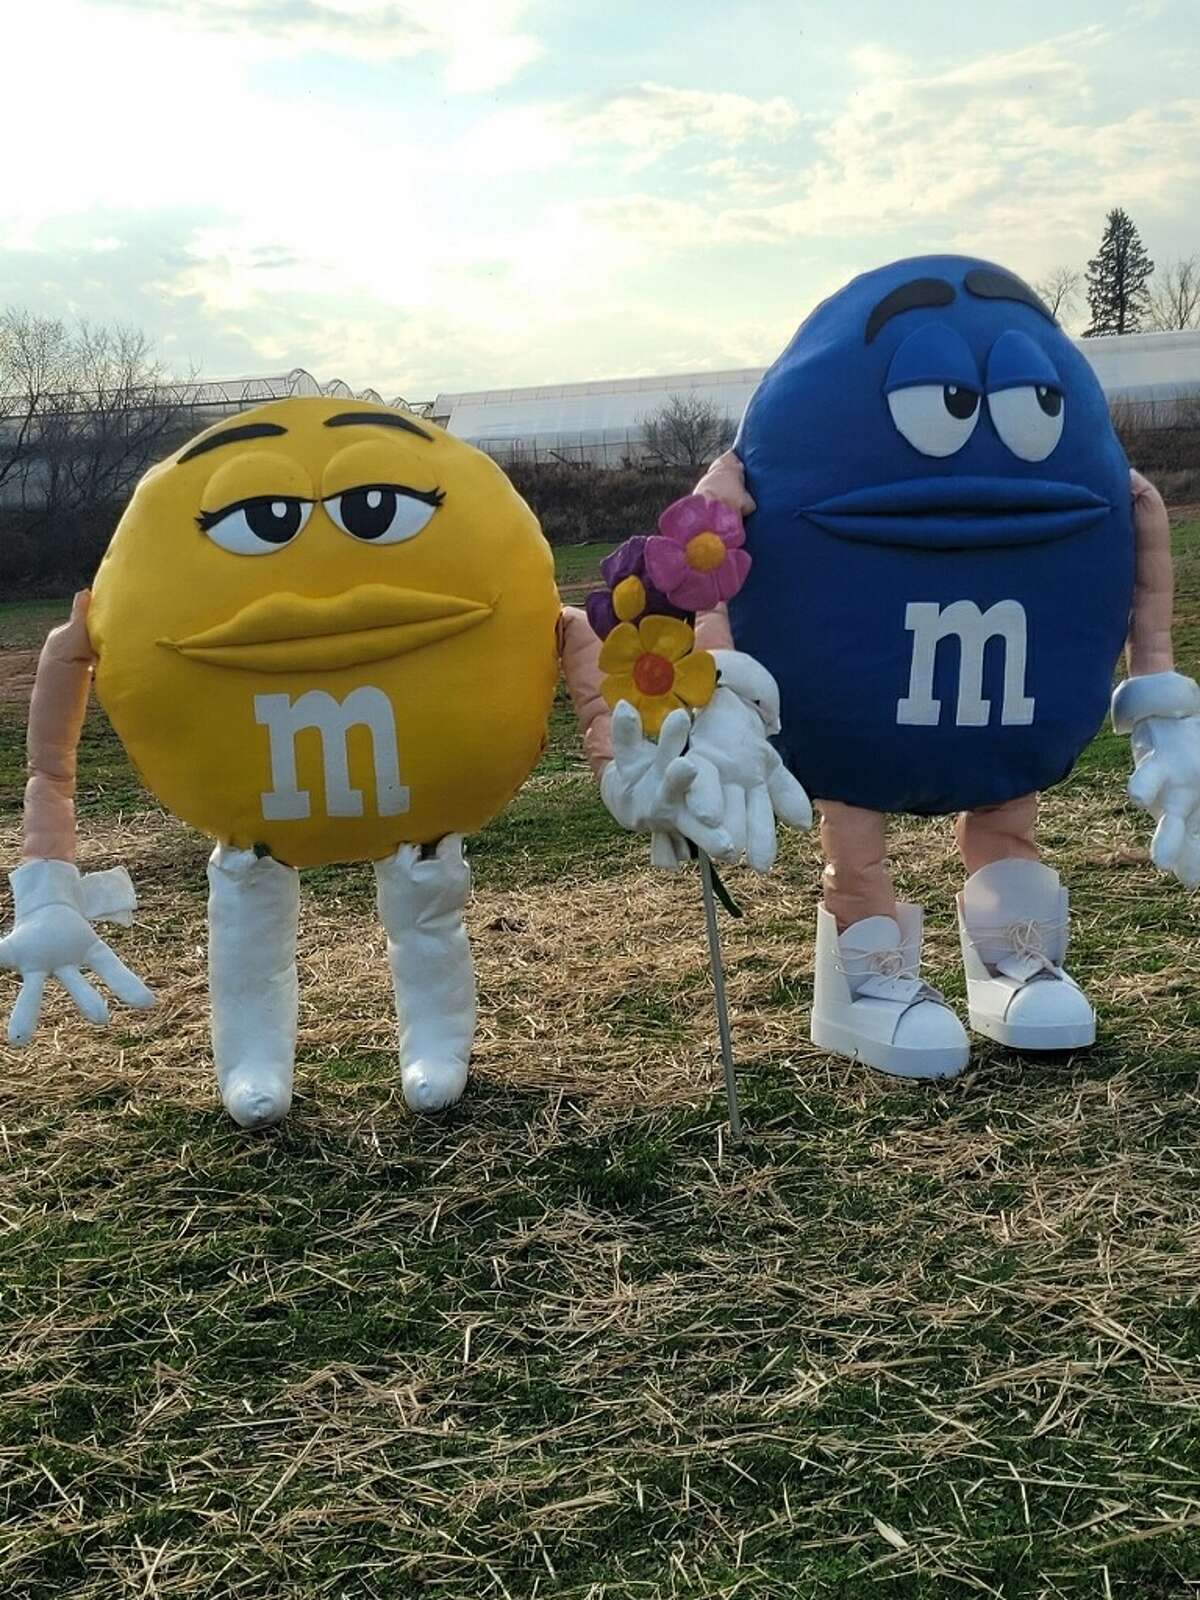 Missing 6-foot M&M returned to Beaumont Farm in Wallingford